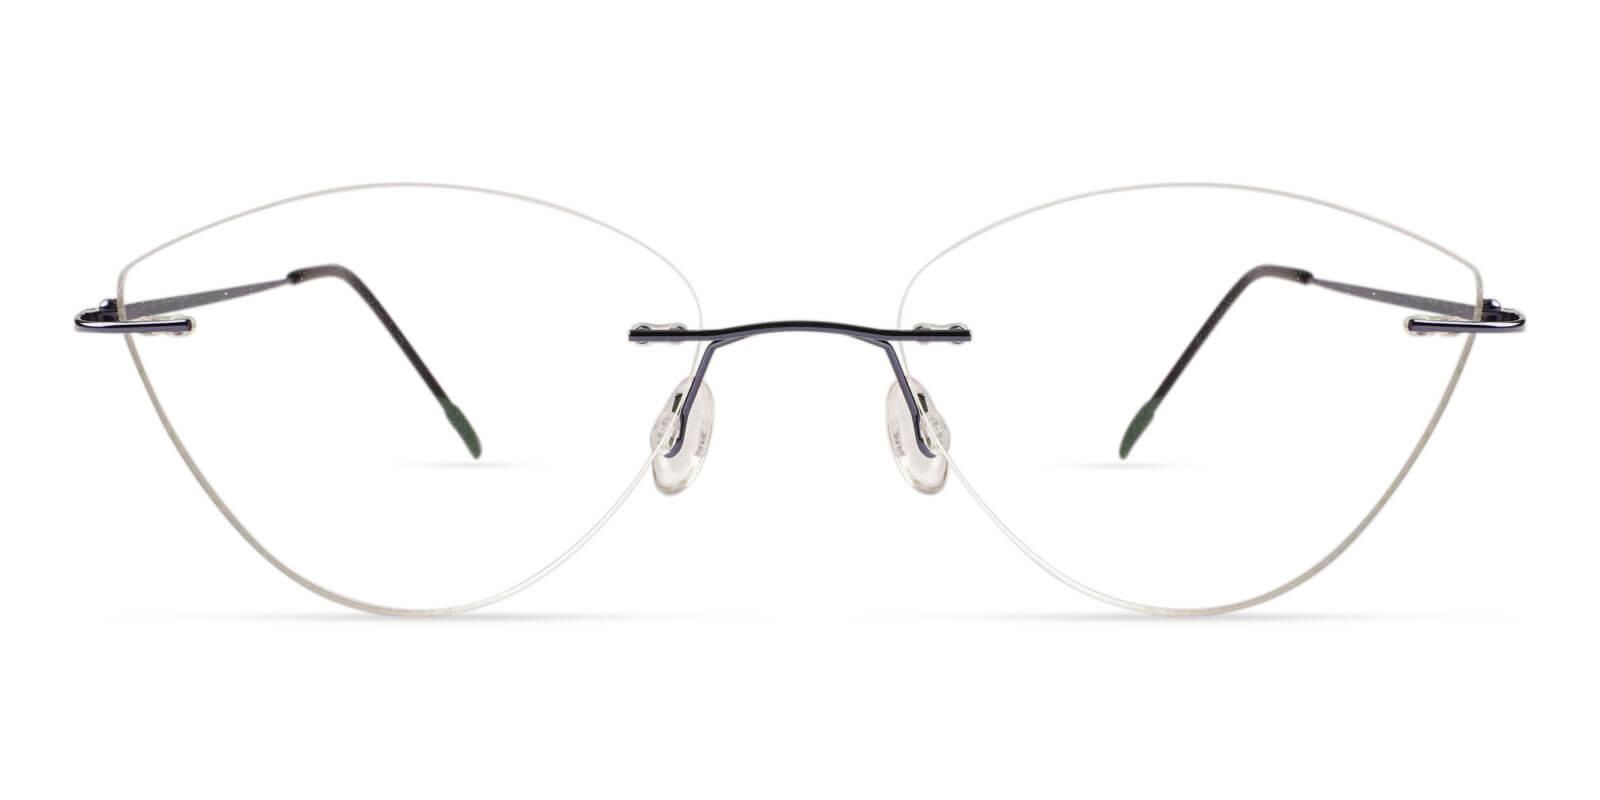 Congo Blue Metal Eyeglasses , NosePads Frames from ABBE Glasses